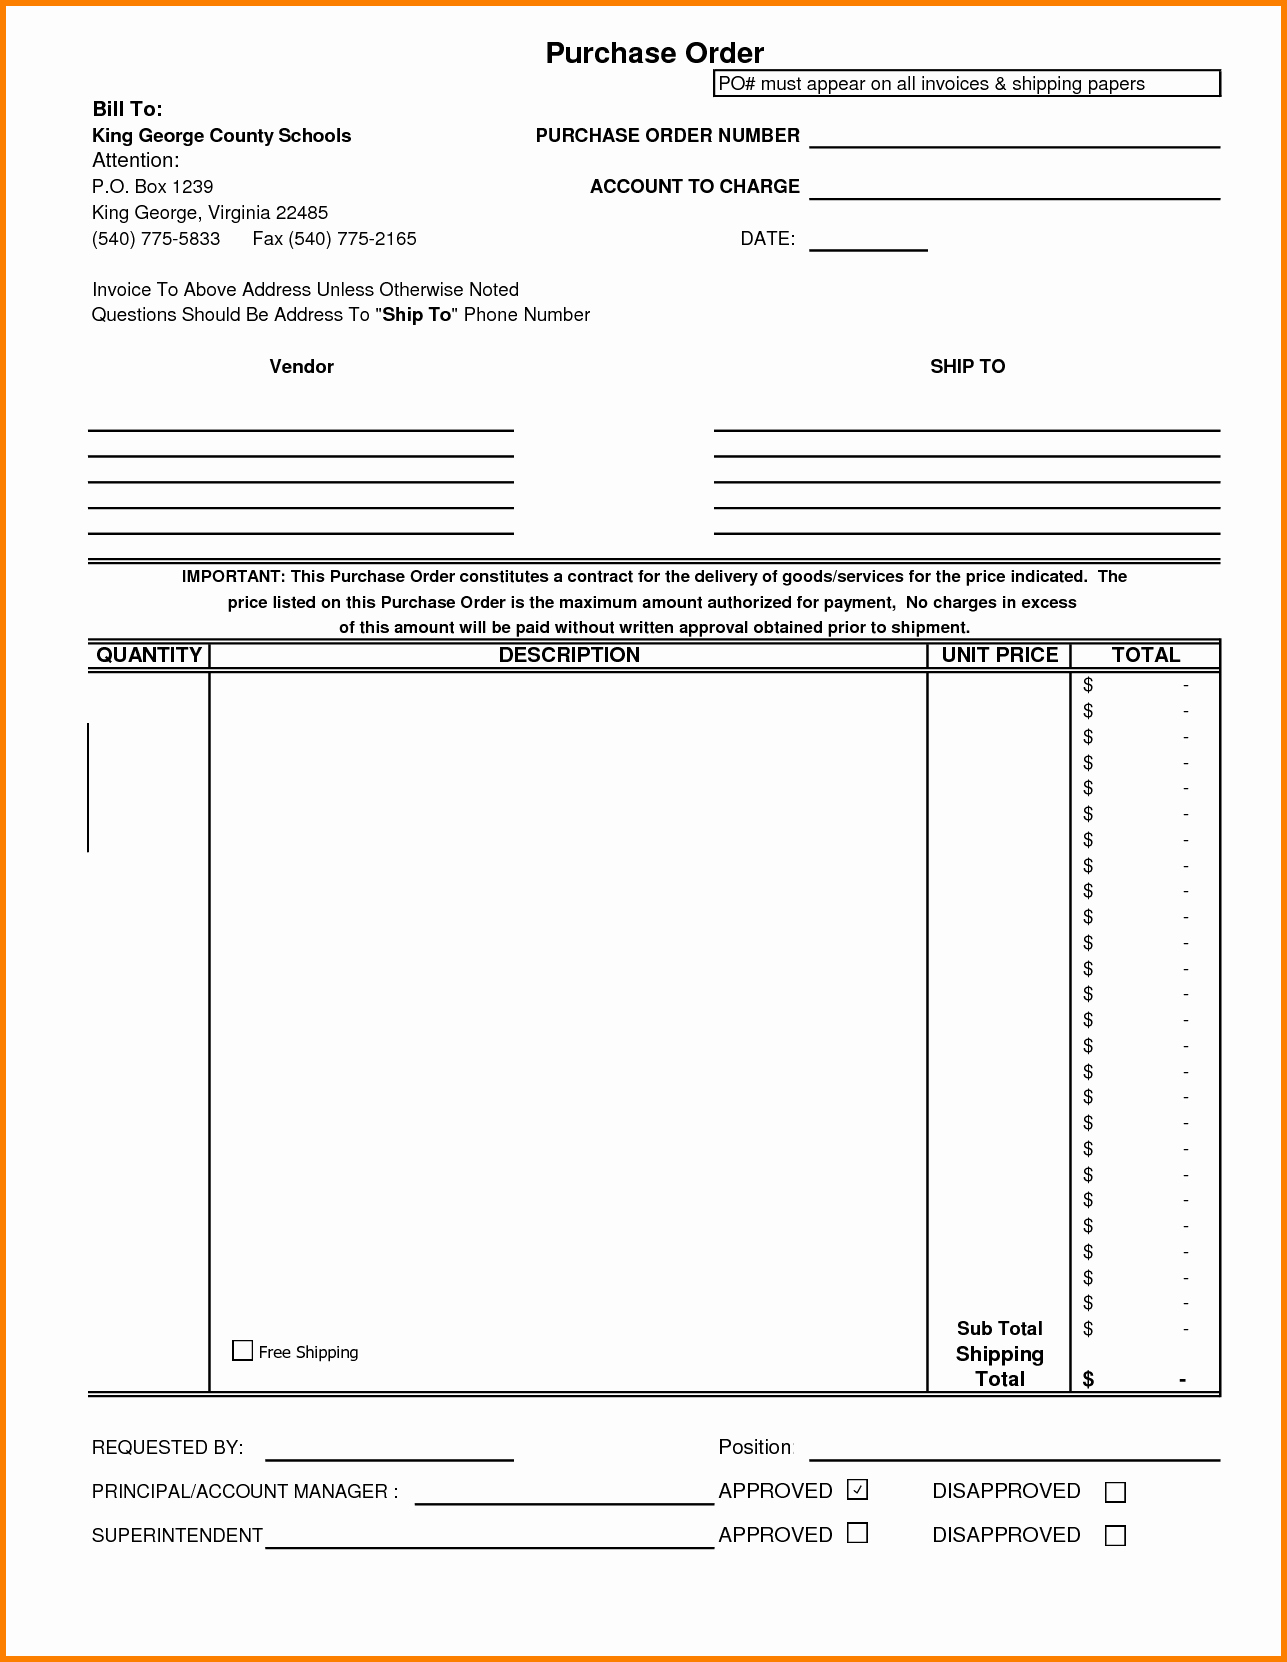 Blank Invoice Template Free New Blank Invoices Template and Invlimdnsorg Splendid Free